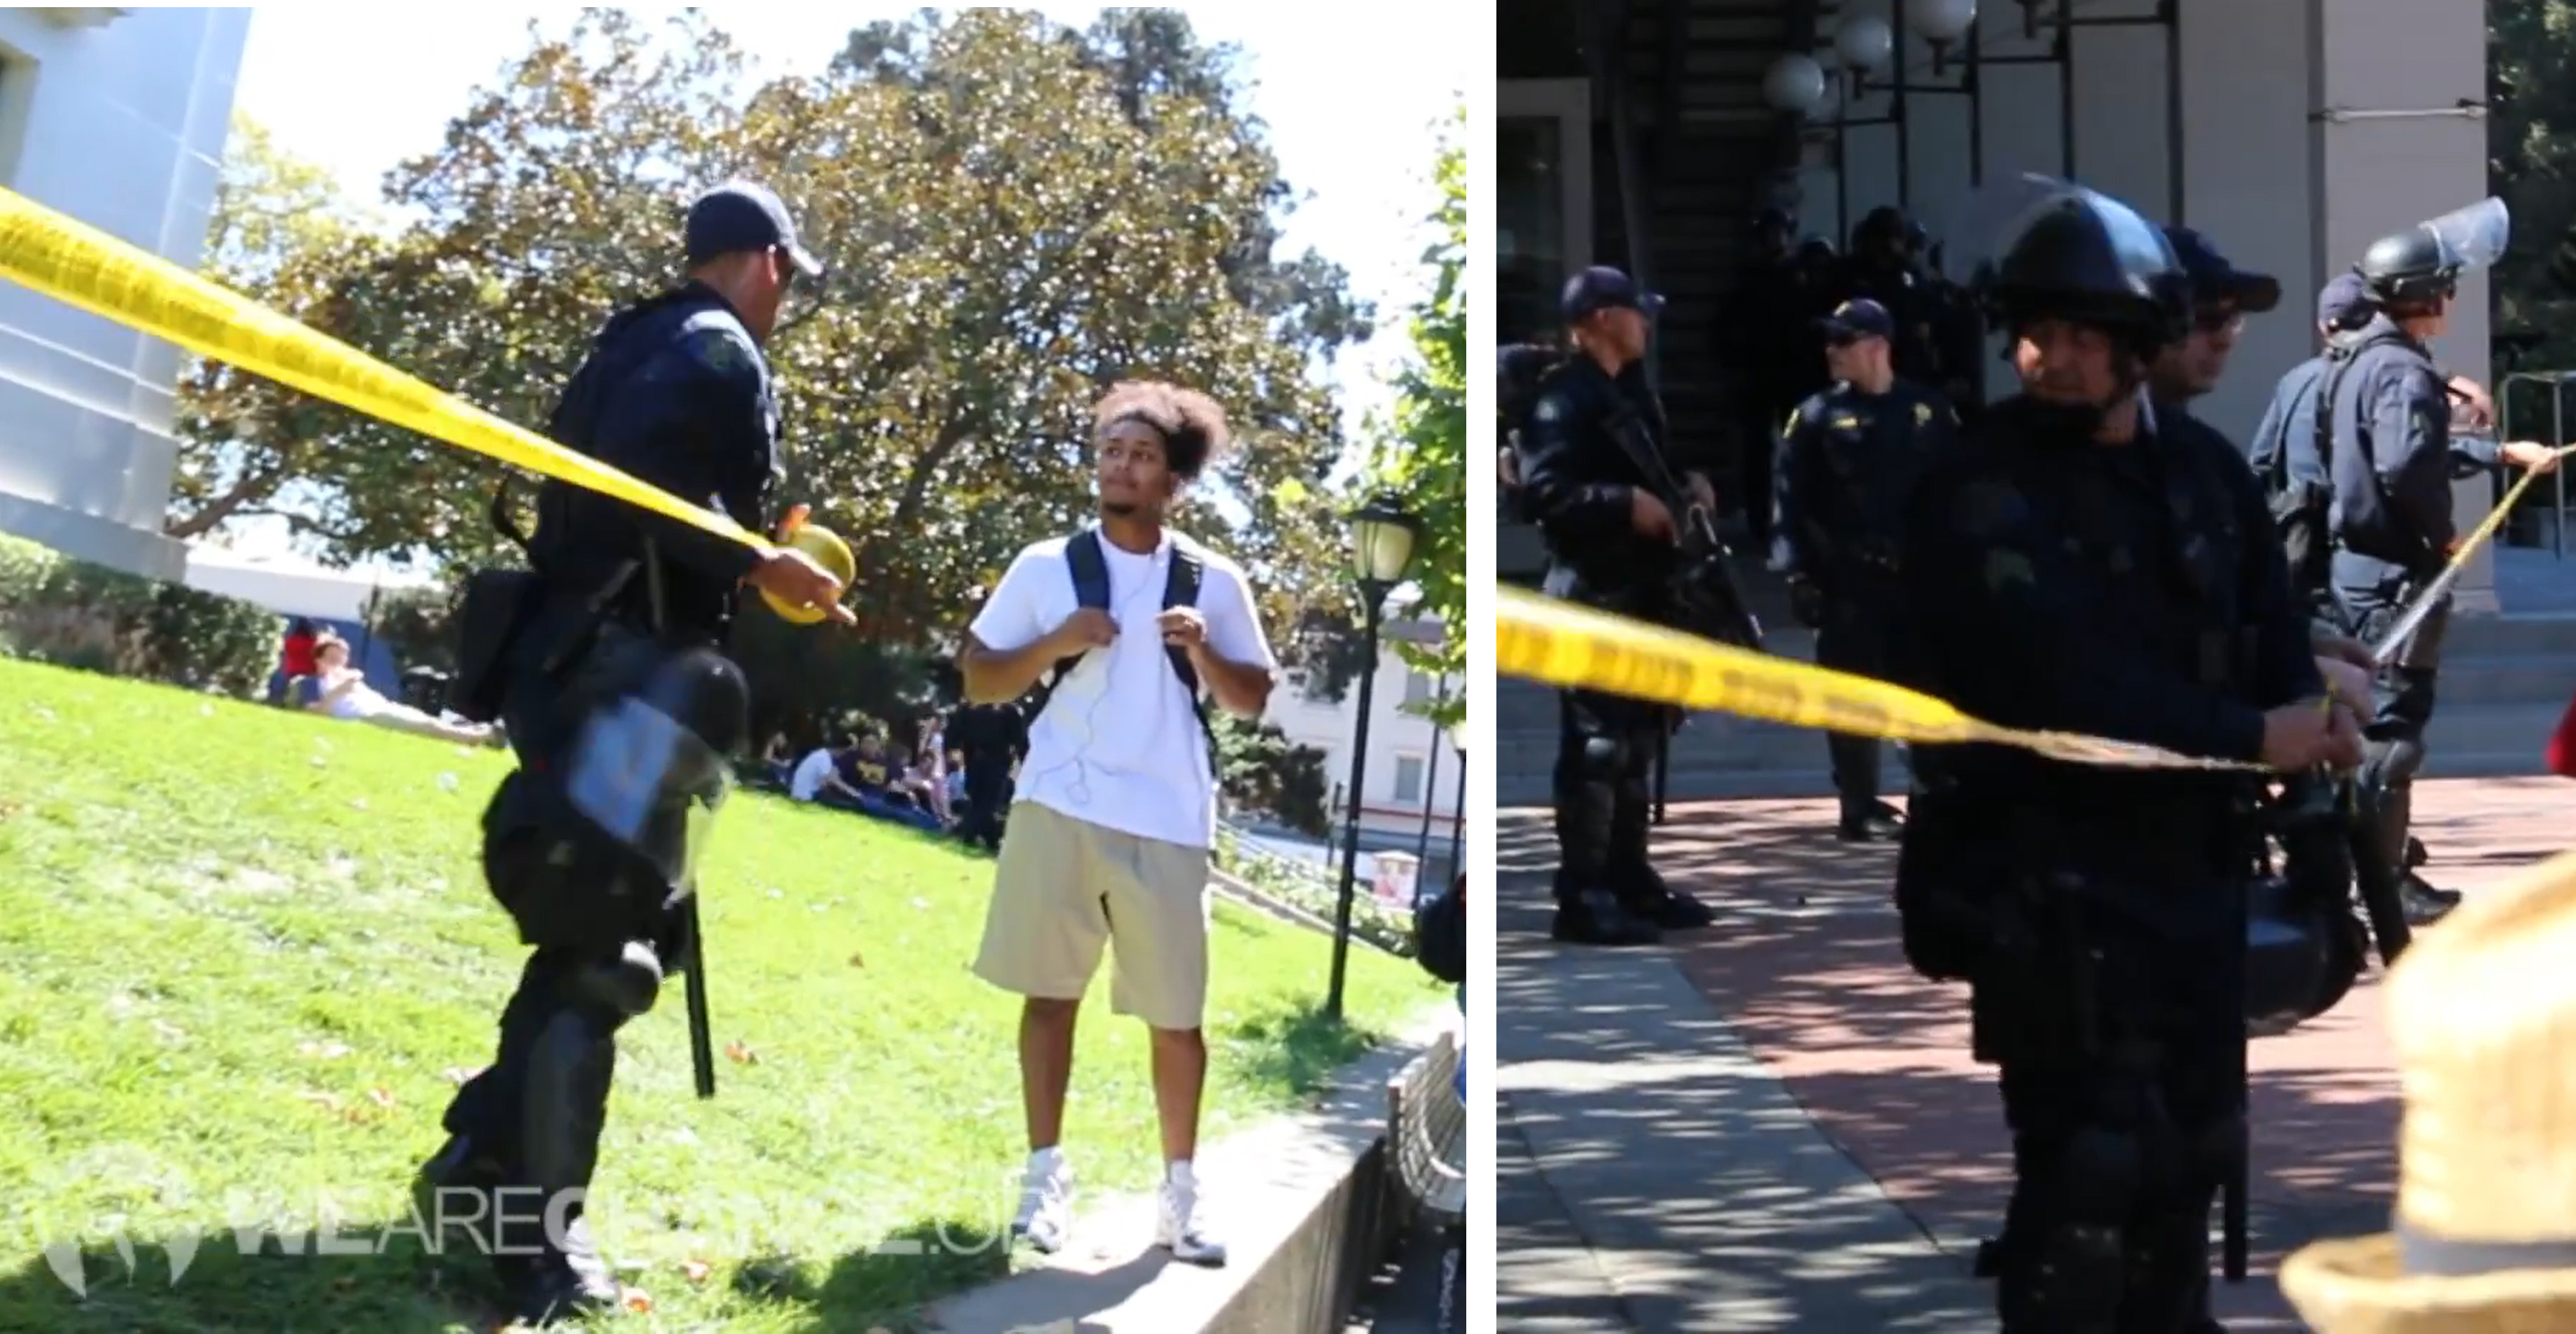 2-Police-become-common-site-at-Berkeley.jpg